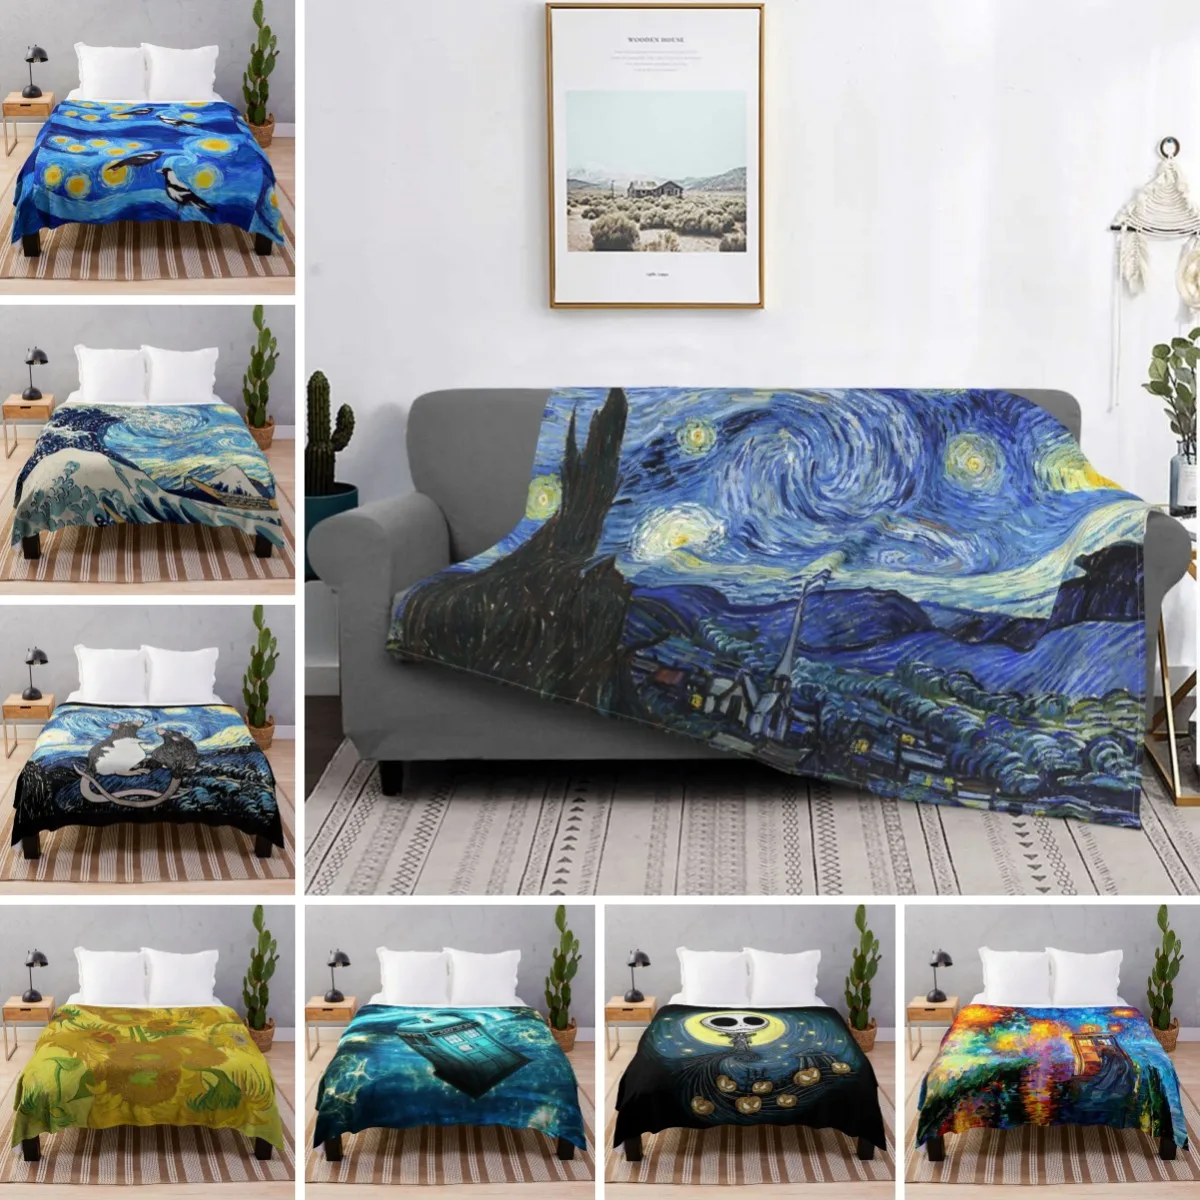 

Blanket The Starry Night by Vincent Van Gogh Art Print Throw Blanket Lightweight Cozy for Sofa Chair Bed Office Adult Kids Gift